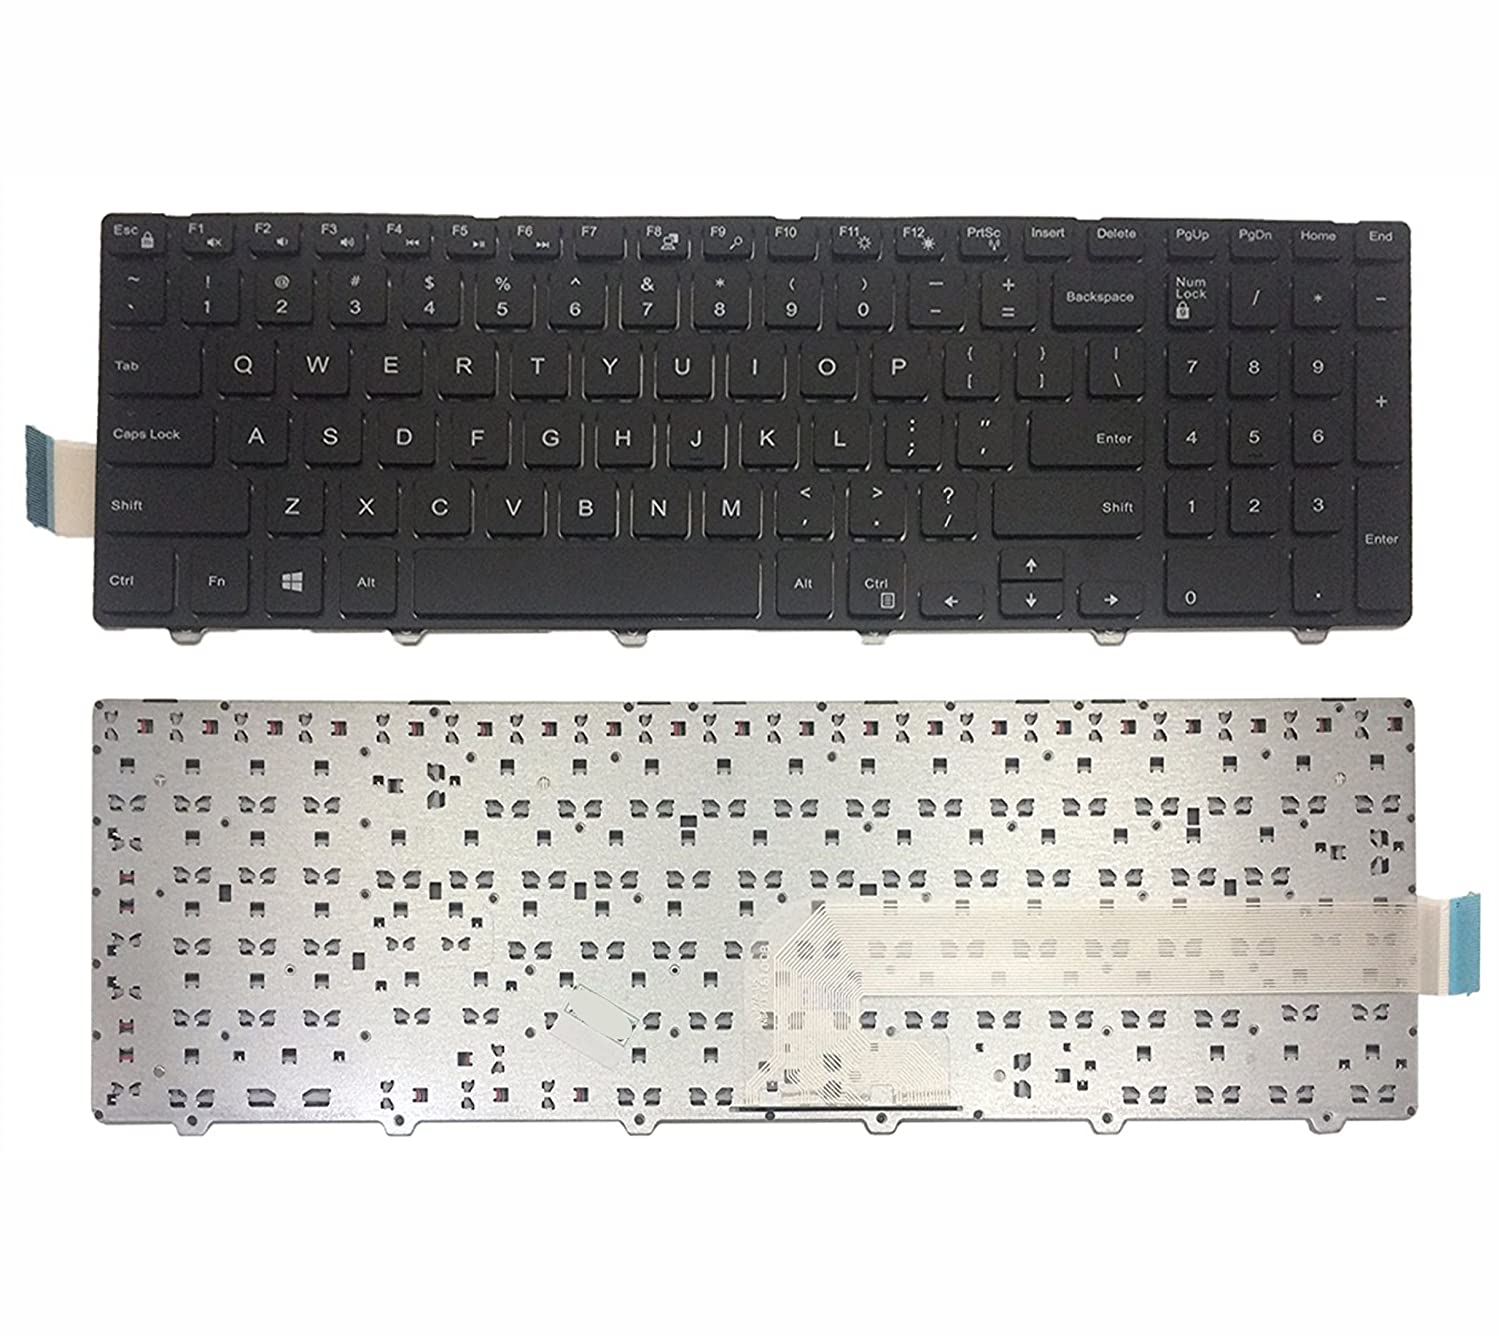 Laptop Keyboard for DELL Inspiron 15 3541 3542 3543 5542 5545 5547 5551 5552 5555 5557 5558 5559 5759 7557 AR Arabic 0WVT2N WVT2N MP-13N73A0-442 SG-63510-XUA SN7234 New and Original 